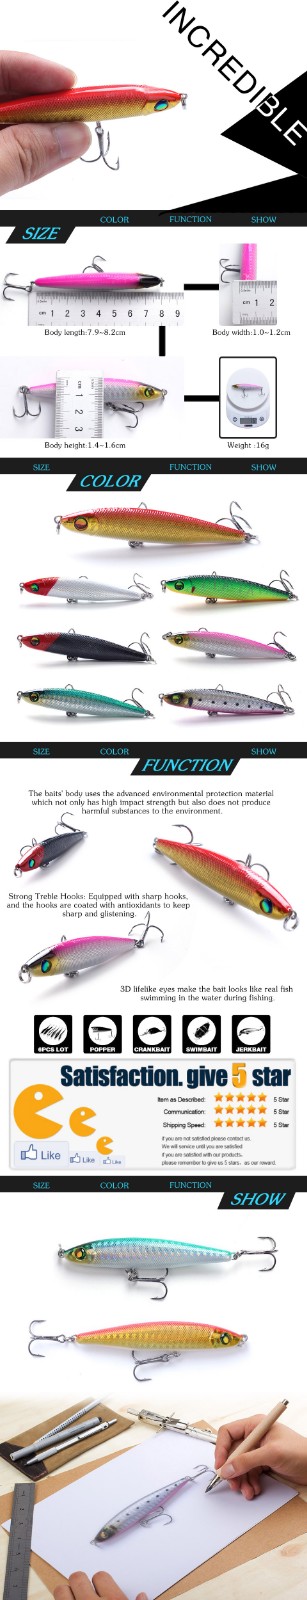 XIN-V -Swimbait Supplier, Best Lures | Xinv